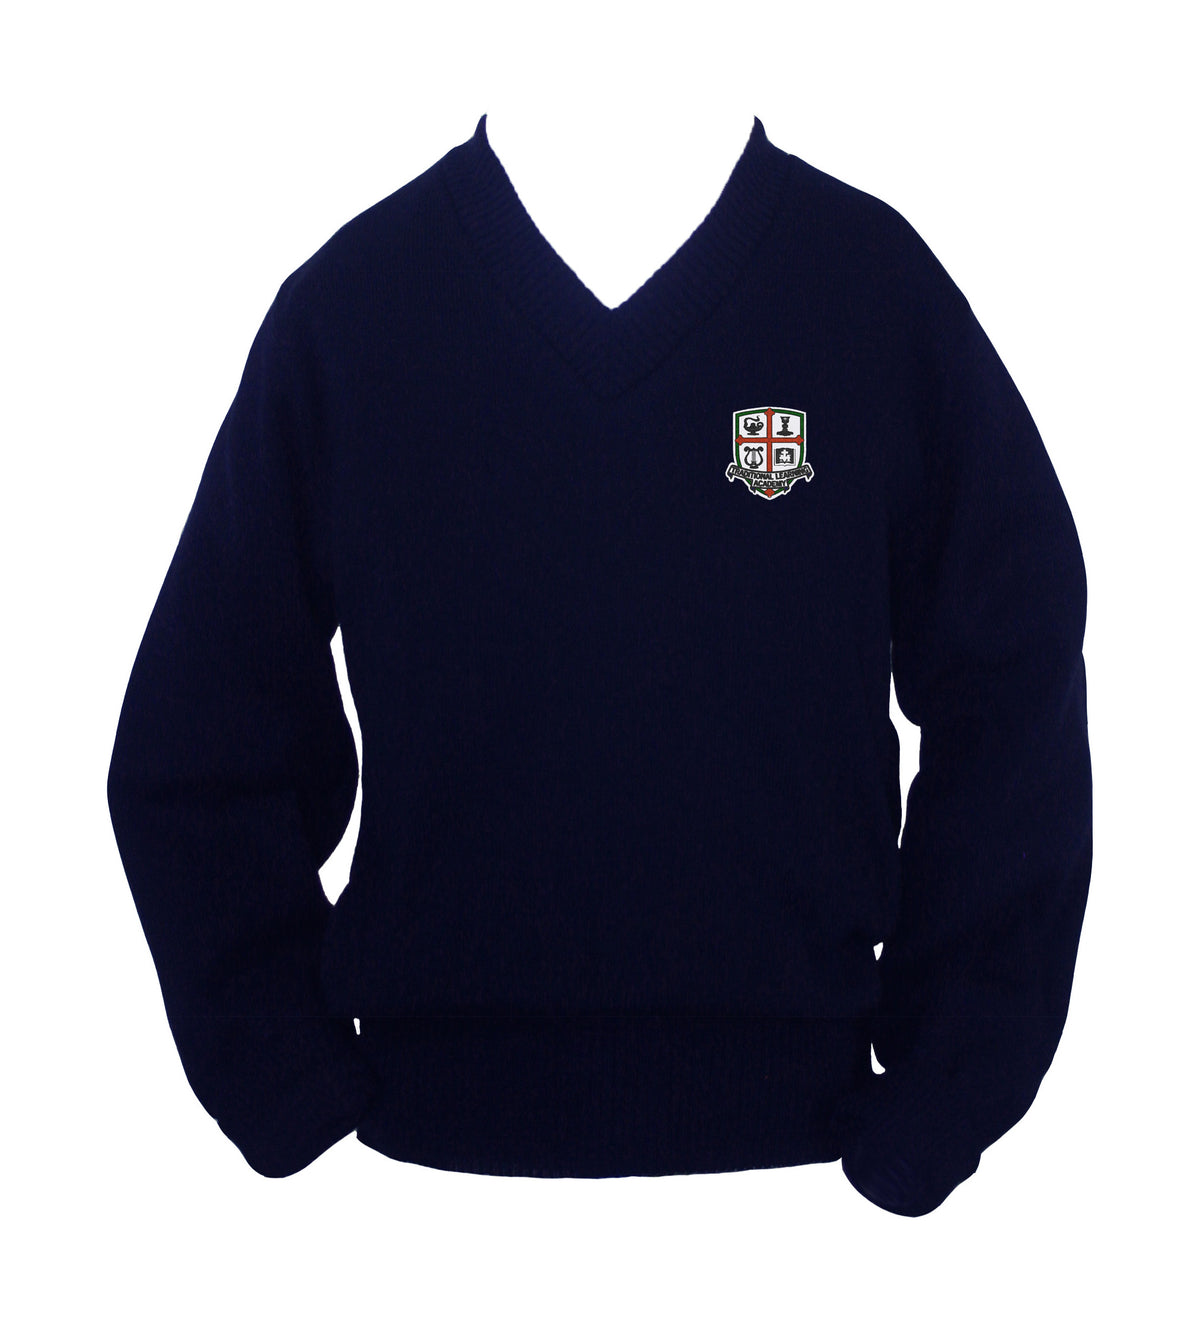 TRADITIONAL LEARNING ACADEMY PULLOVER, SIZE 44 AND UP